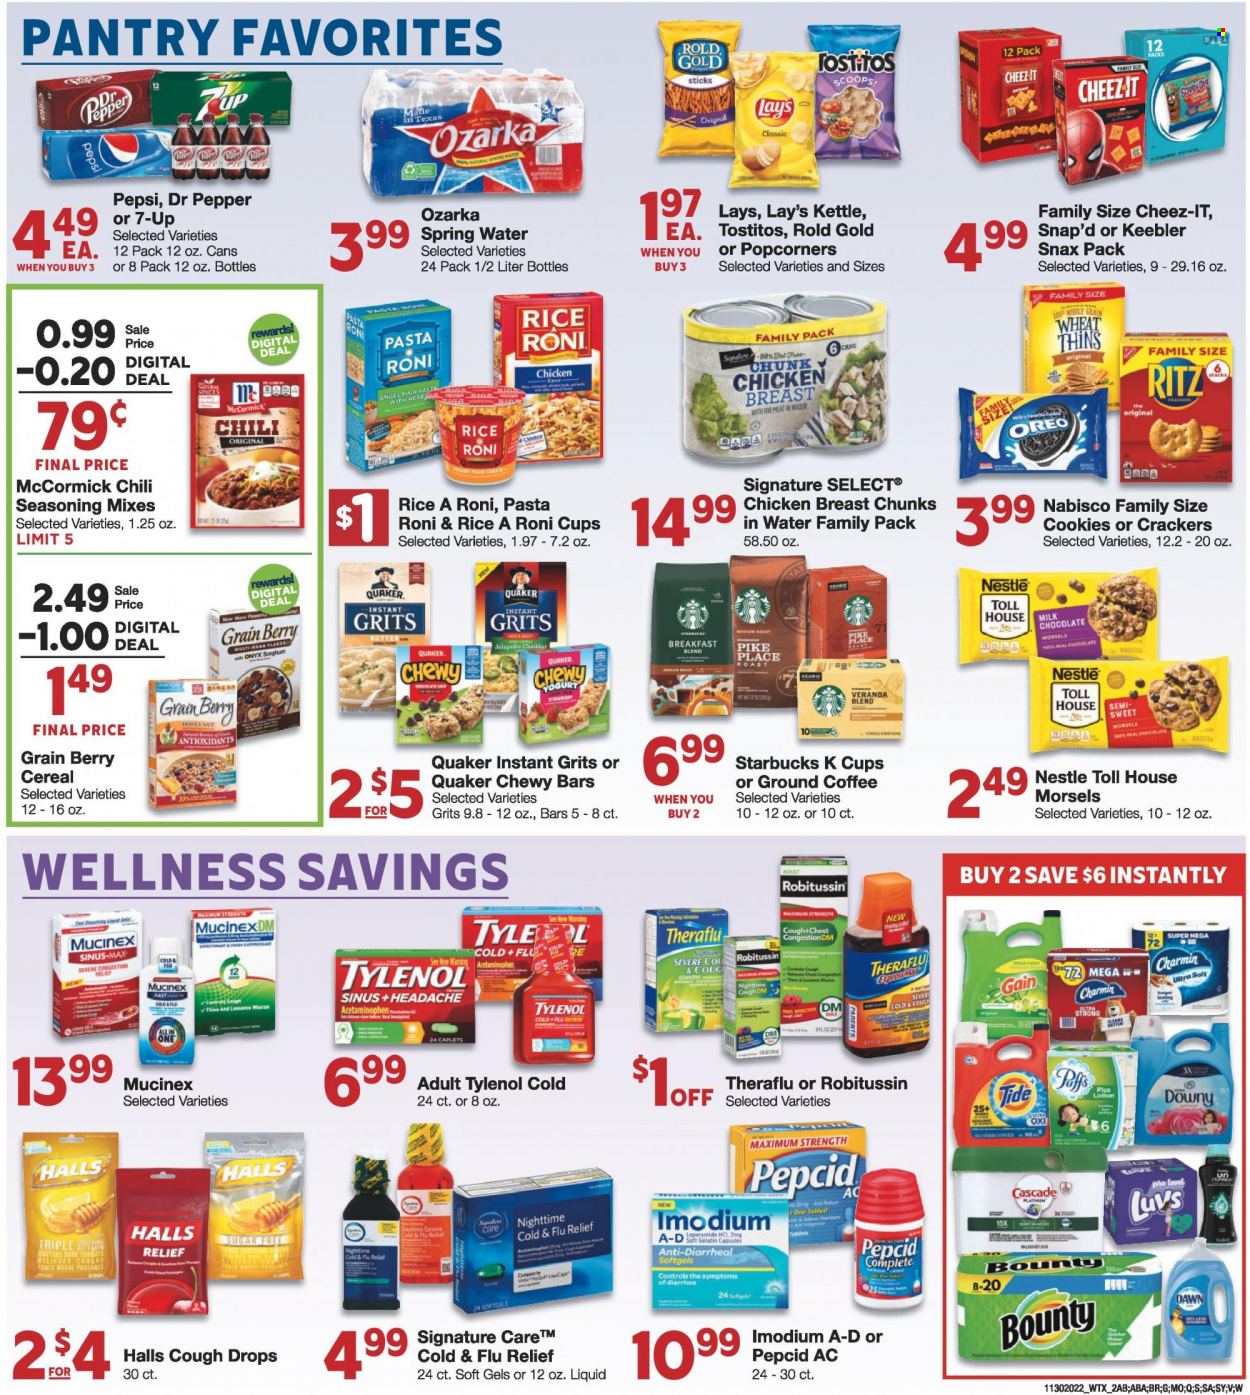 thumbnail - United Supermarkets Flyer - 11/30/2022 - 12/06/2022 - Sales products - jalapeño, chicken breasts, pasta, Quaker, cheese, Oreo, yoghurt, milk, butter, cookies, Nestlé, Halls, Bounty, crackers, Keebler, RITZ, Lay’s, Thins, popcorn, Cheez-It, Tostitos, grits, cereals, spice, Pepsi, Dr. Pepper, 7UP, spring water, coffee, Starbucks, ground coffee, coffee capsules, K-Cups, breakfast blend, Charmin, Gain, Cascade, Tide, body lotion, cup, Cold & Flu, Mucinex, Robitussin, Theraflu, Tylenol, Imodium, Pepcid, gelatin, cough drops. Page 2.